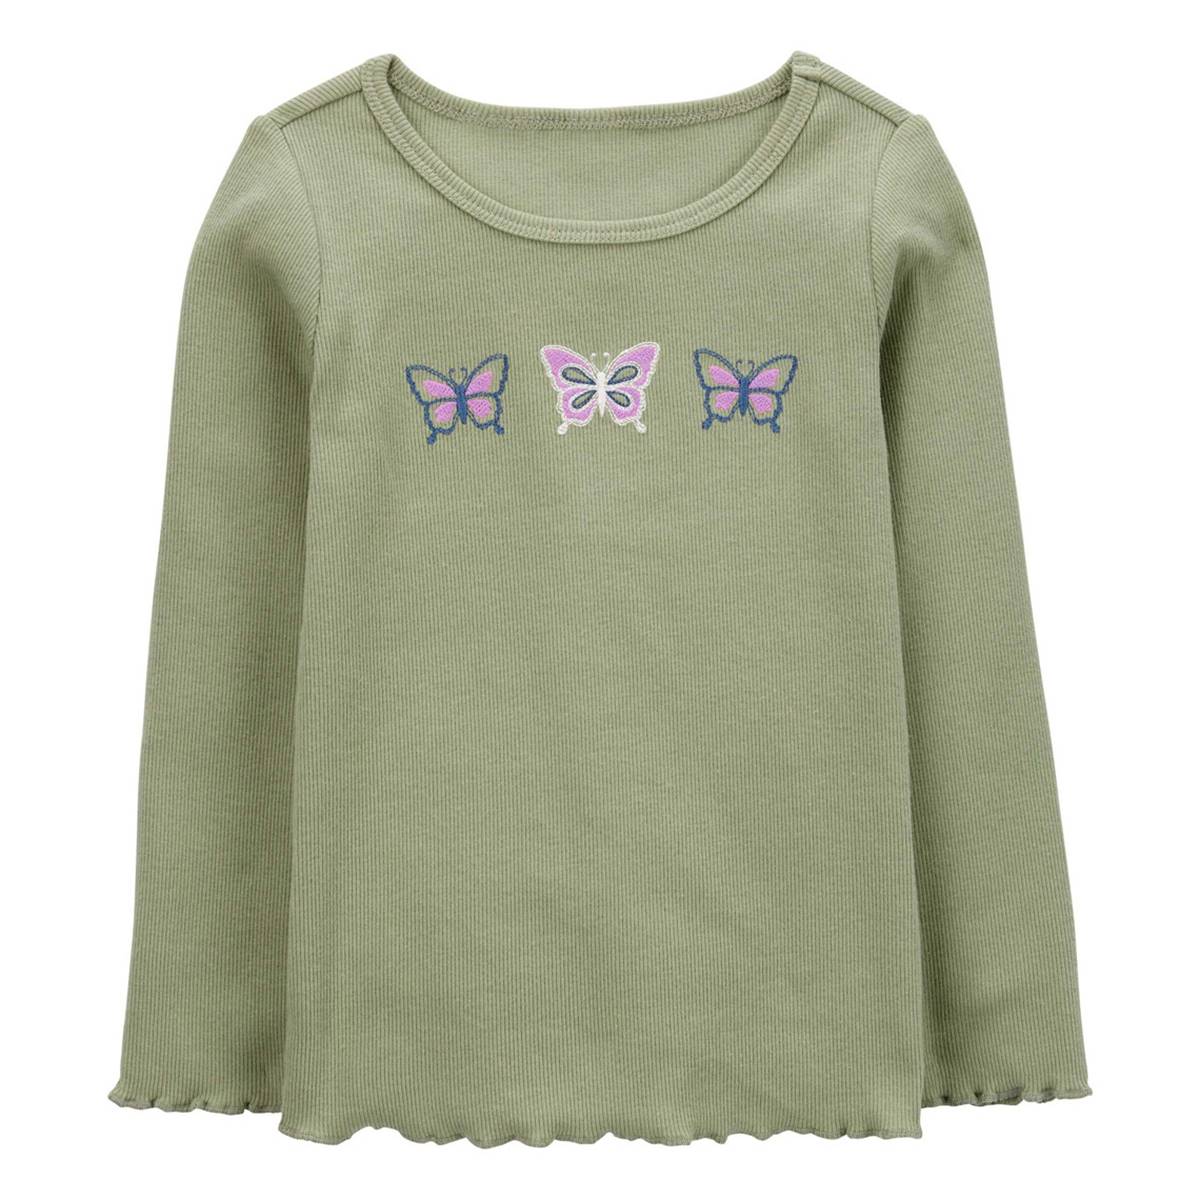 Toddler Girl Carters(R) Butterfly Embroidered Long Sleeve Top